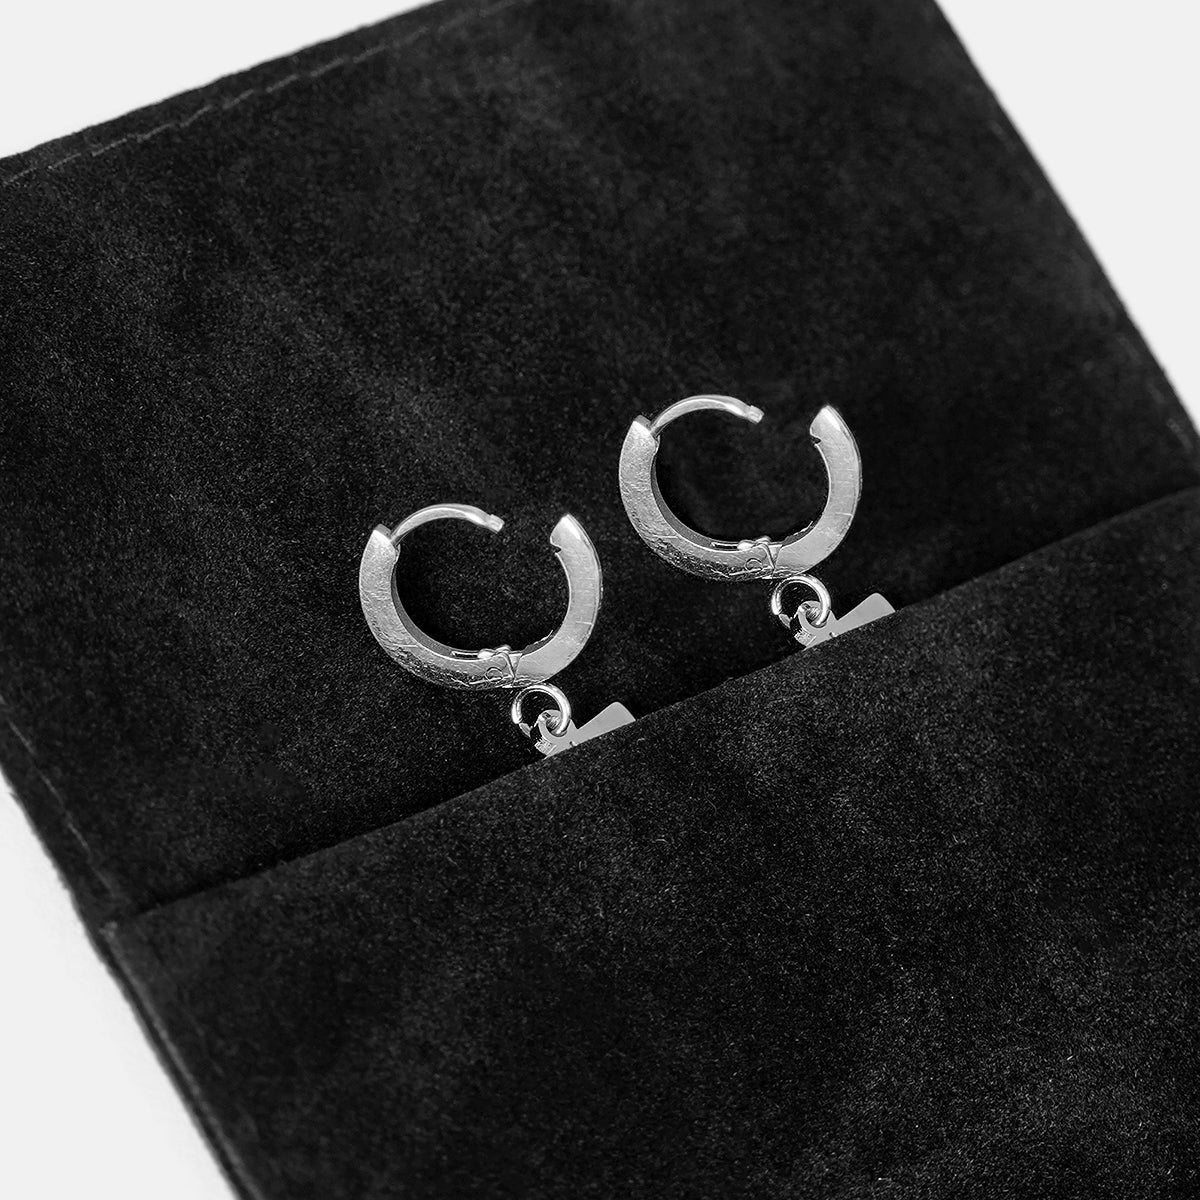 97 Number Earring - Stainless Steel